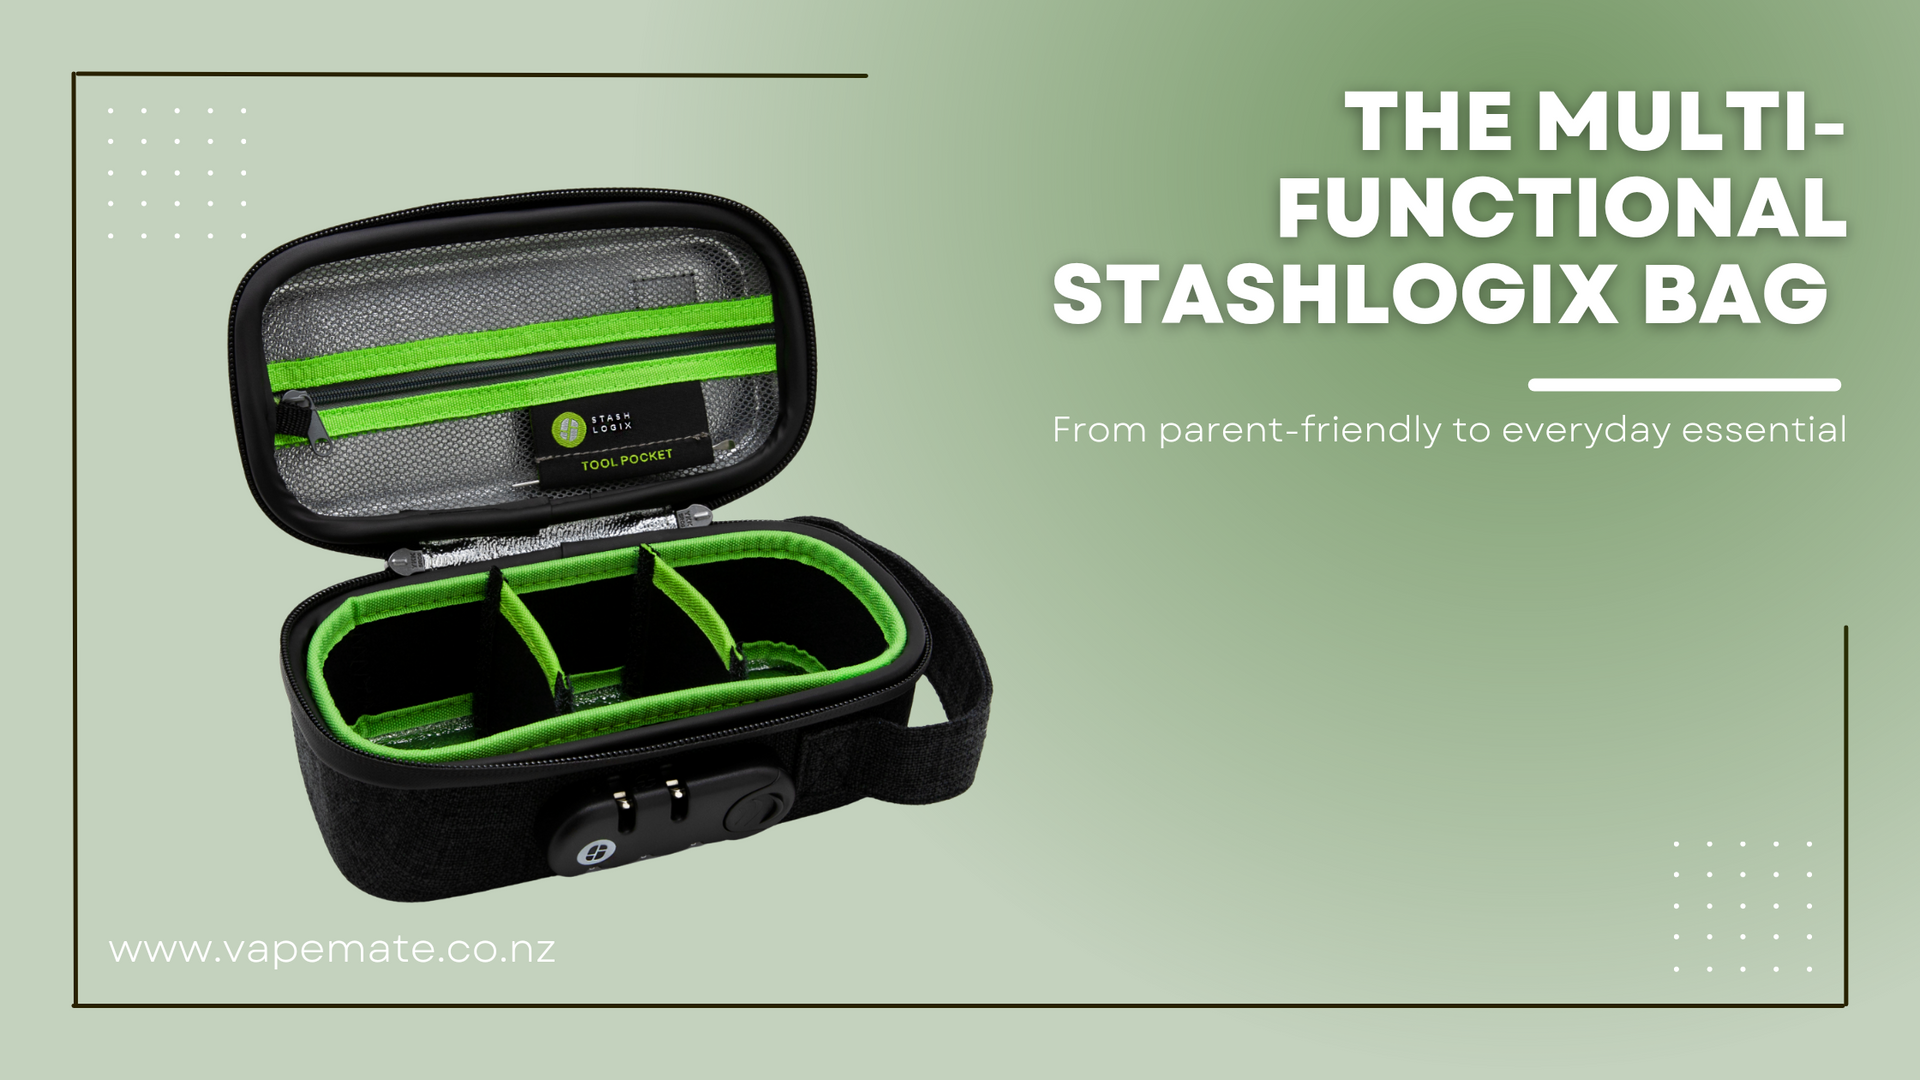 From Parent-Friendly to Everyday Essential: The Multi-Functional StashLogix Bag is for everyone